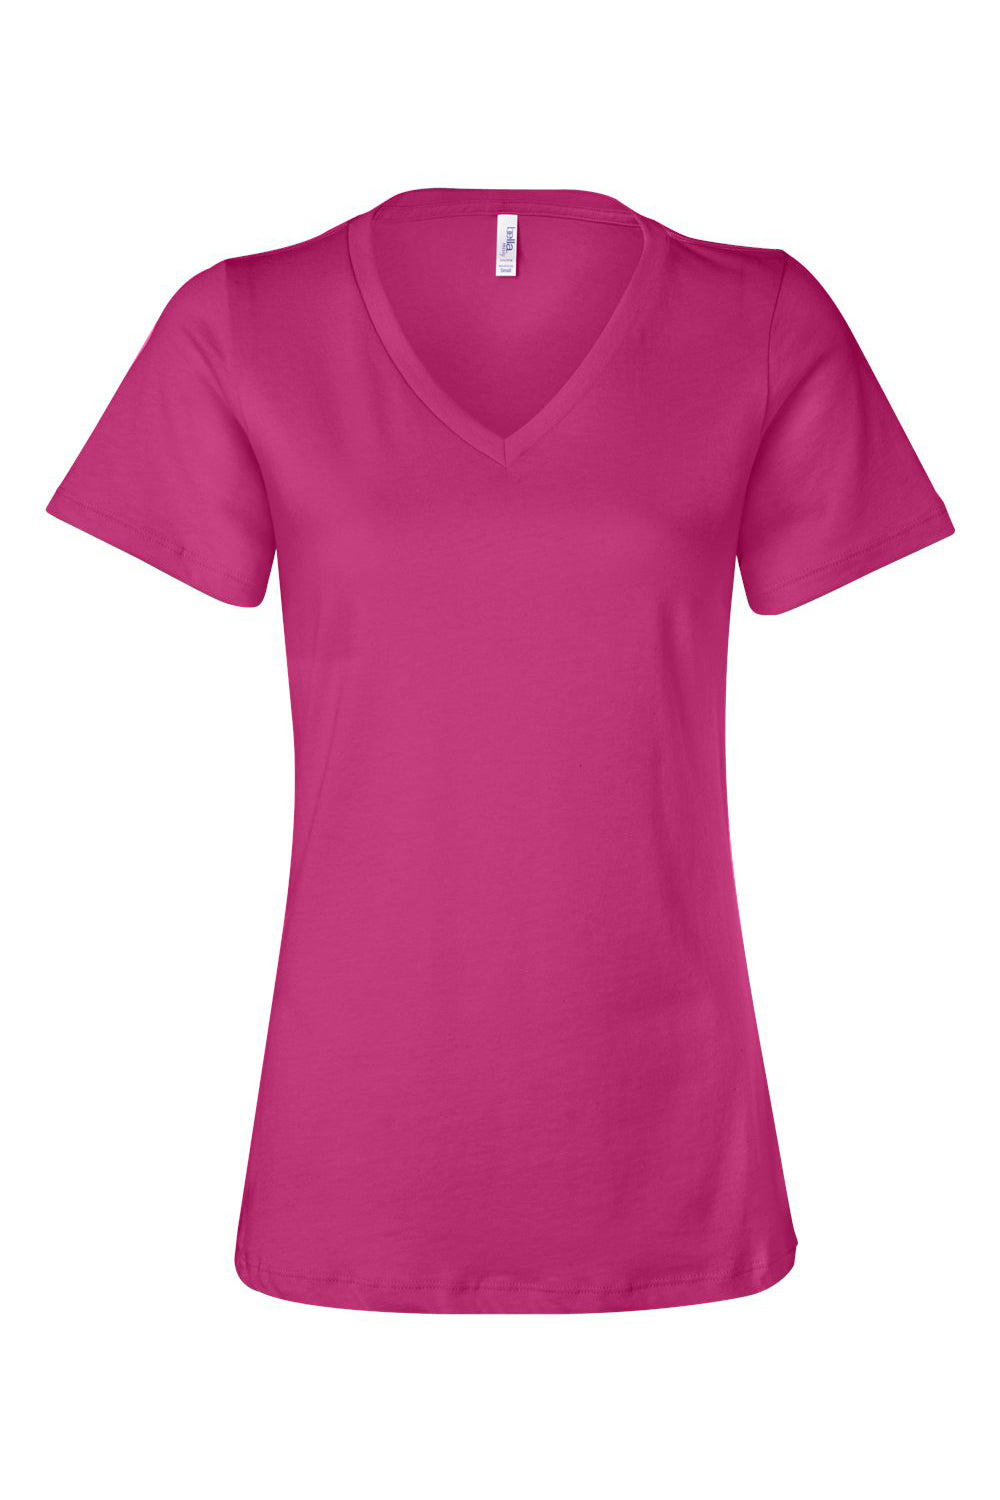 Bella + Canvas BC6405/6405 Womens Relaxed Jersey Short Sleeve V-Neck T-Shirt Berry Pink Flat Front